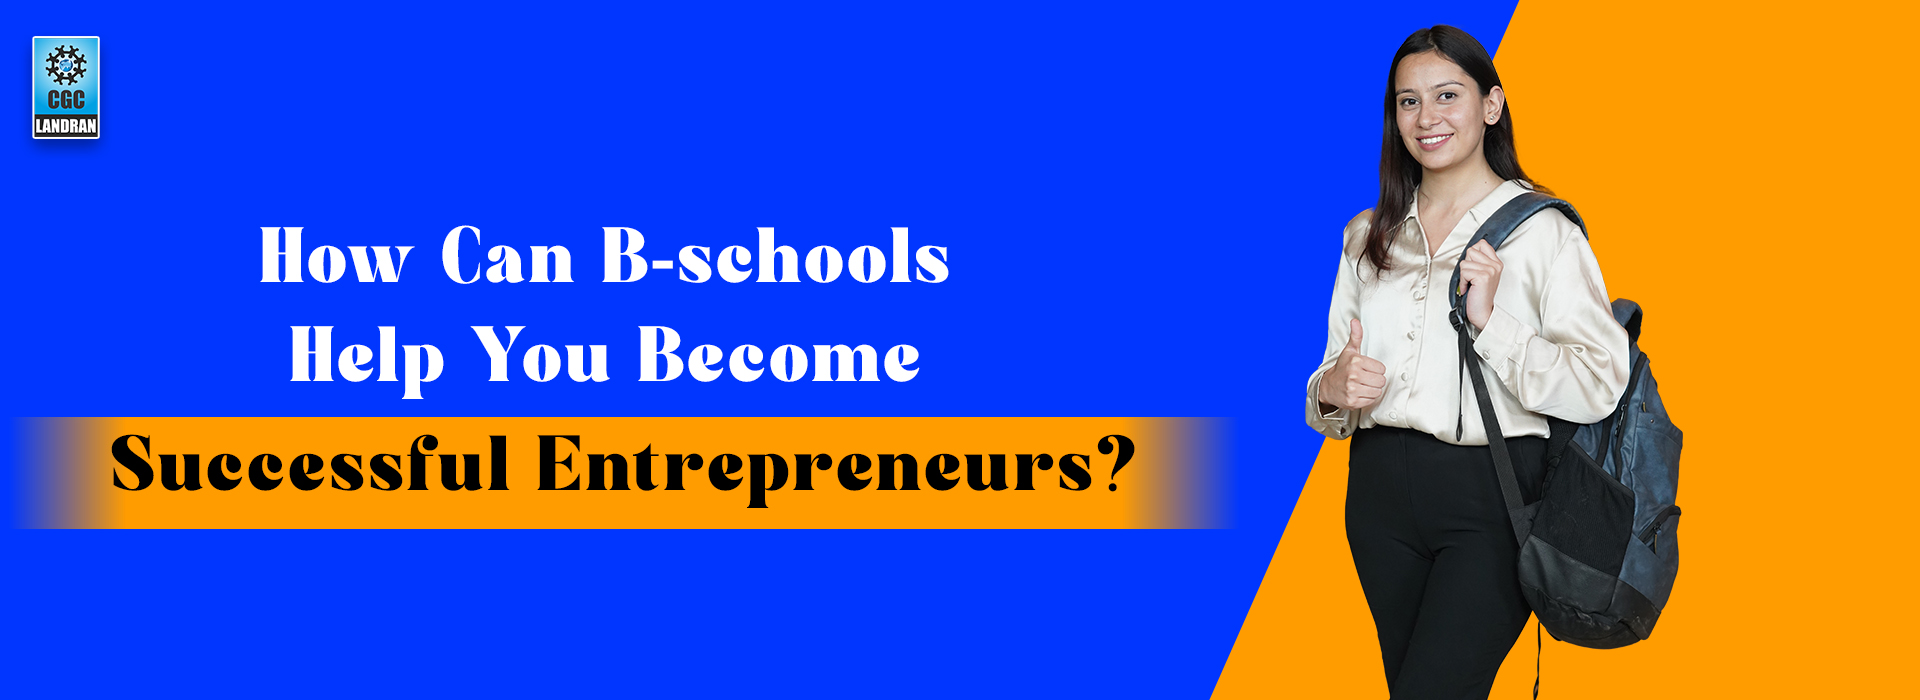 How Can B-schools Help You Become Successful Entrepreneurs? 